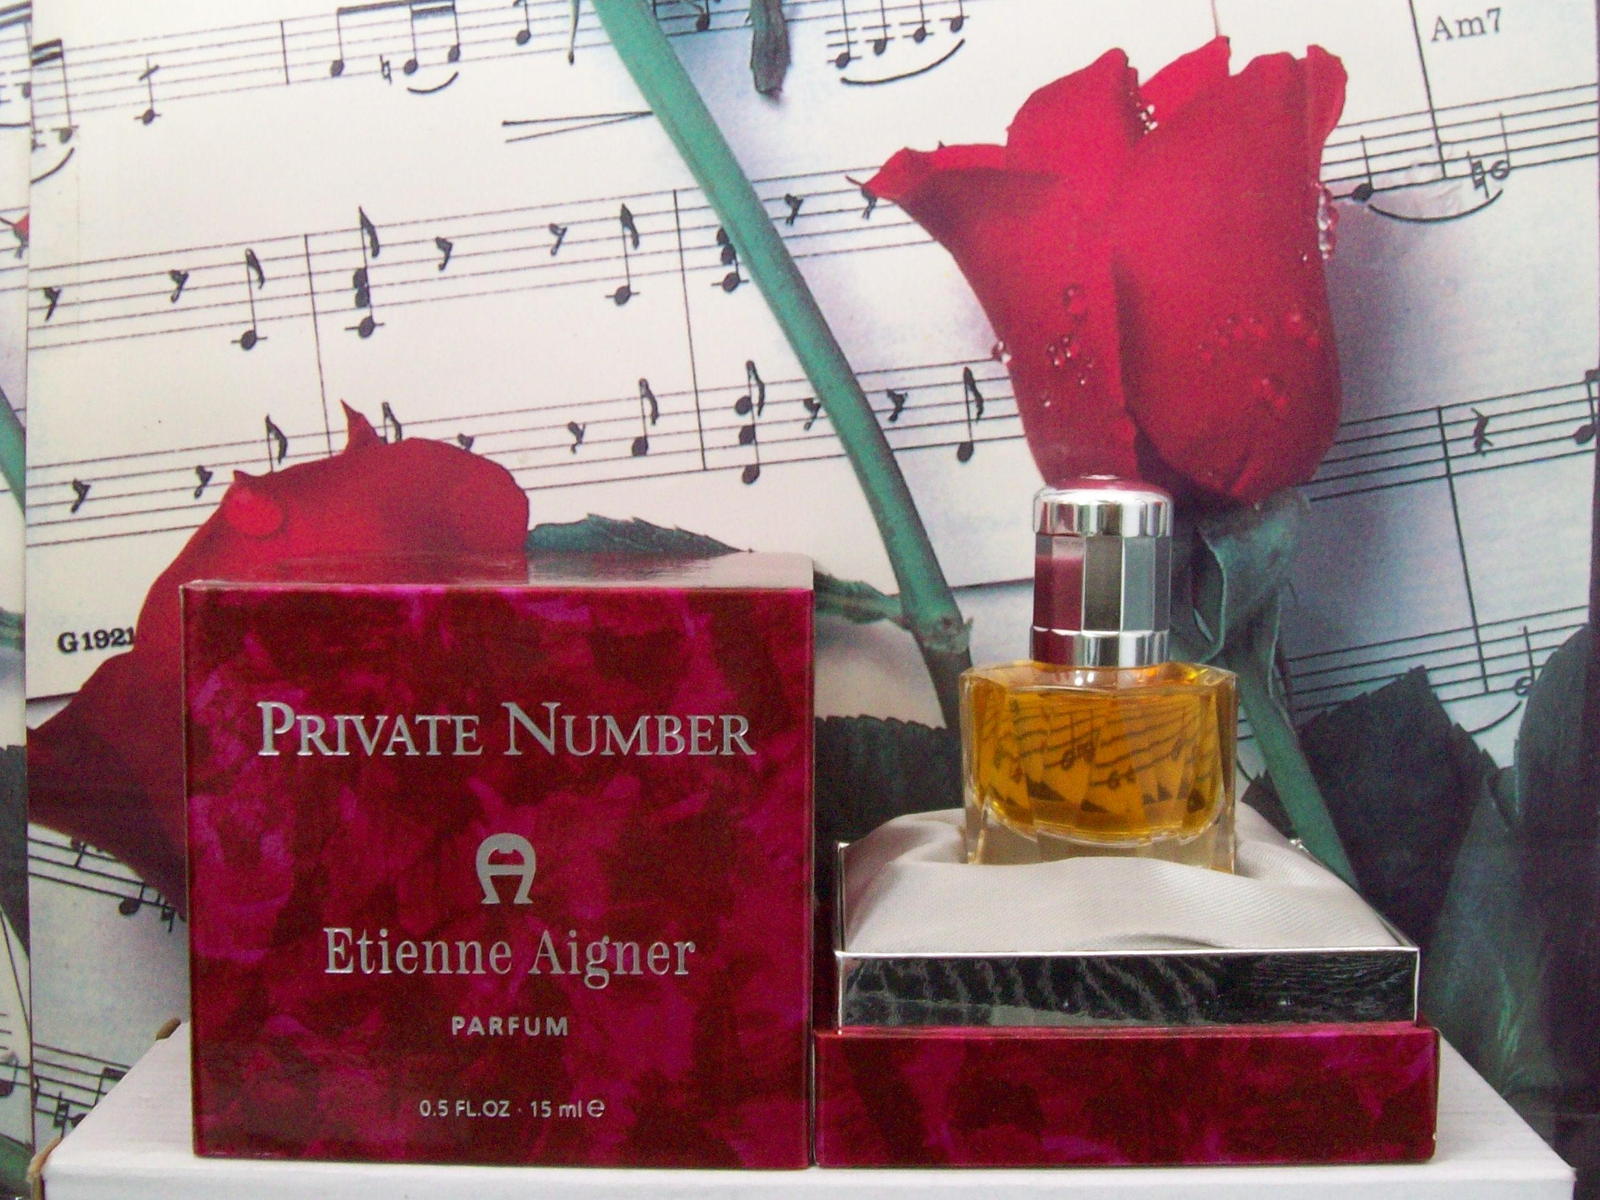 Etienne Aigner Private Number Perfume For Women 0.5 FL. OZ. NWB - $159.99